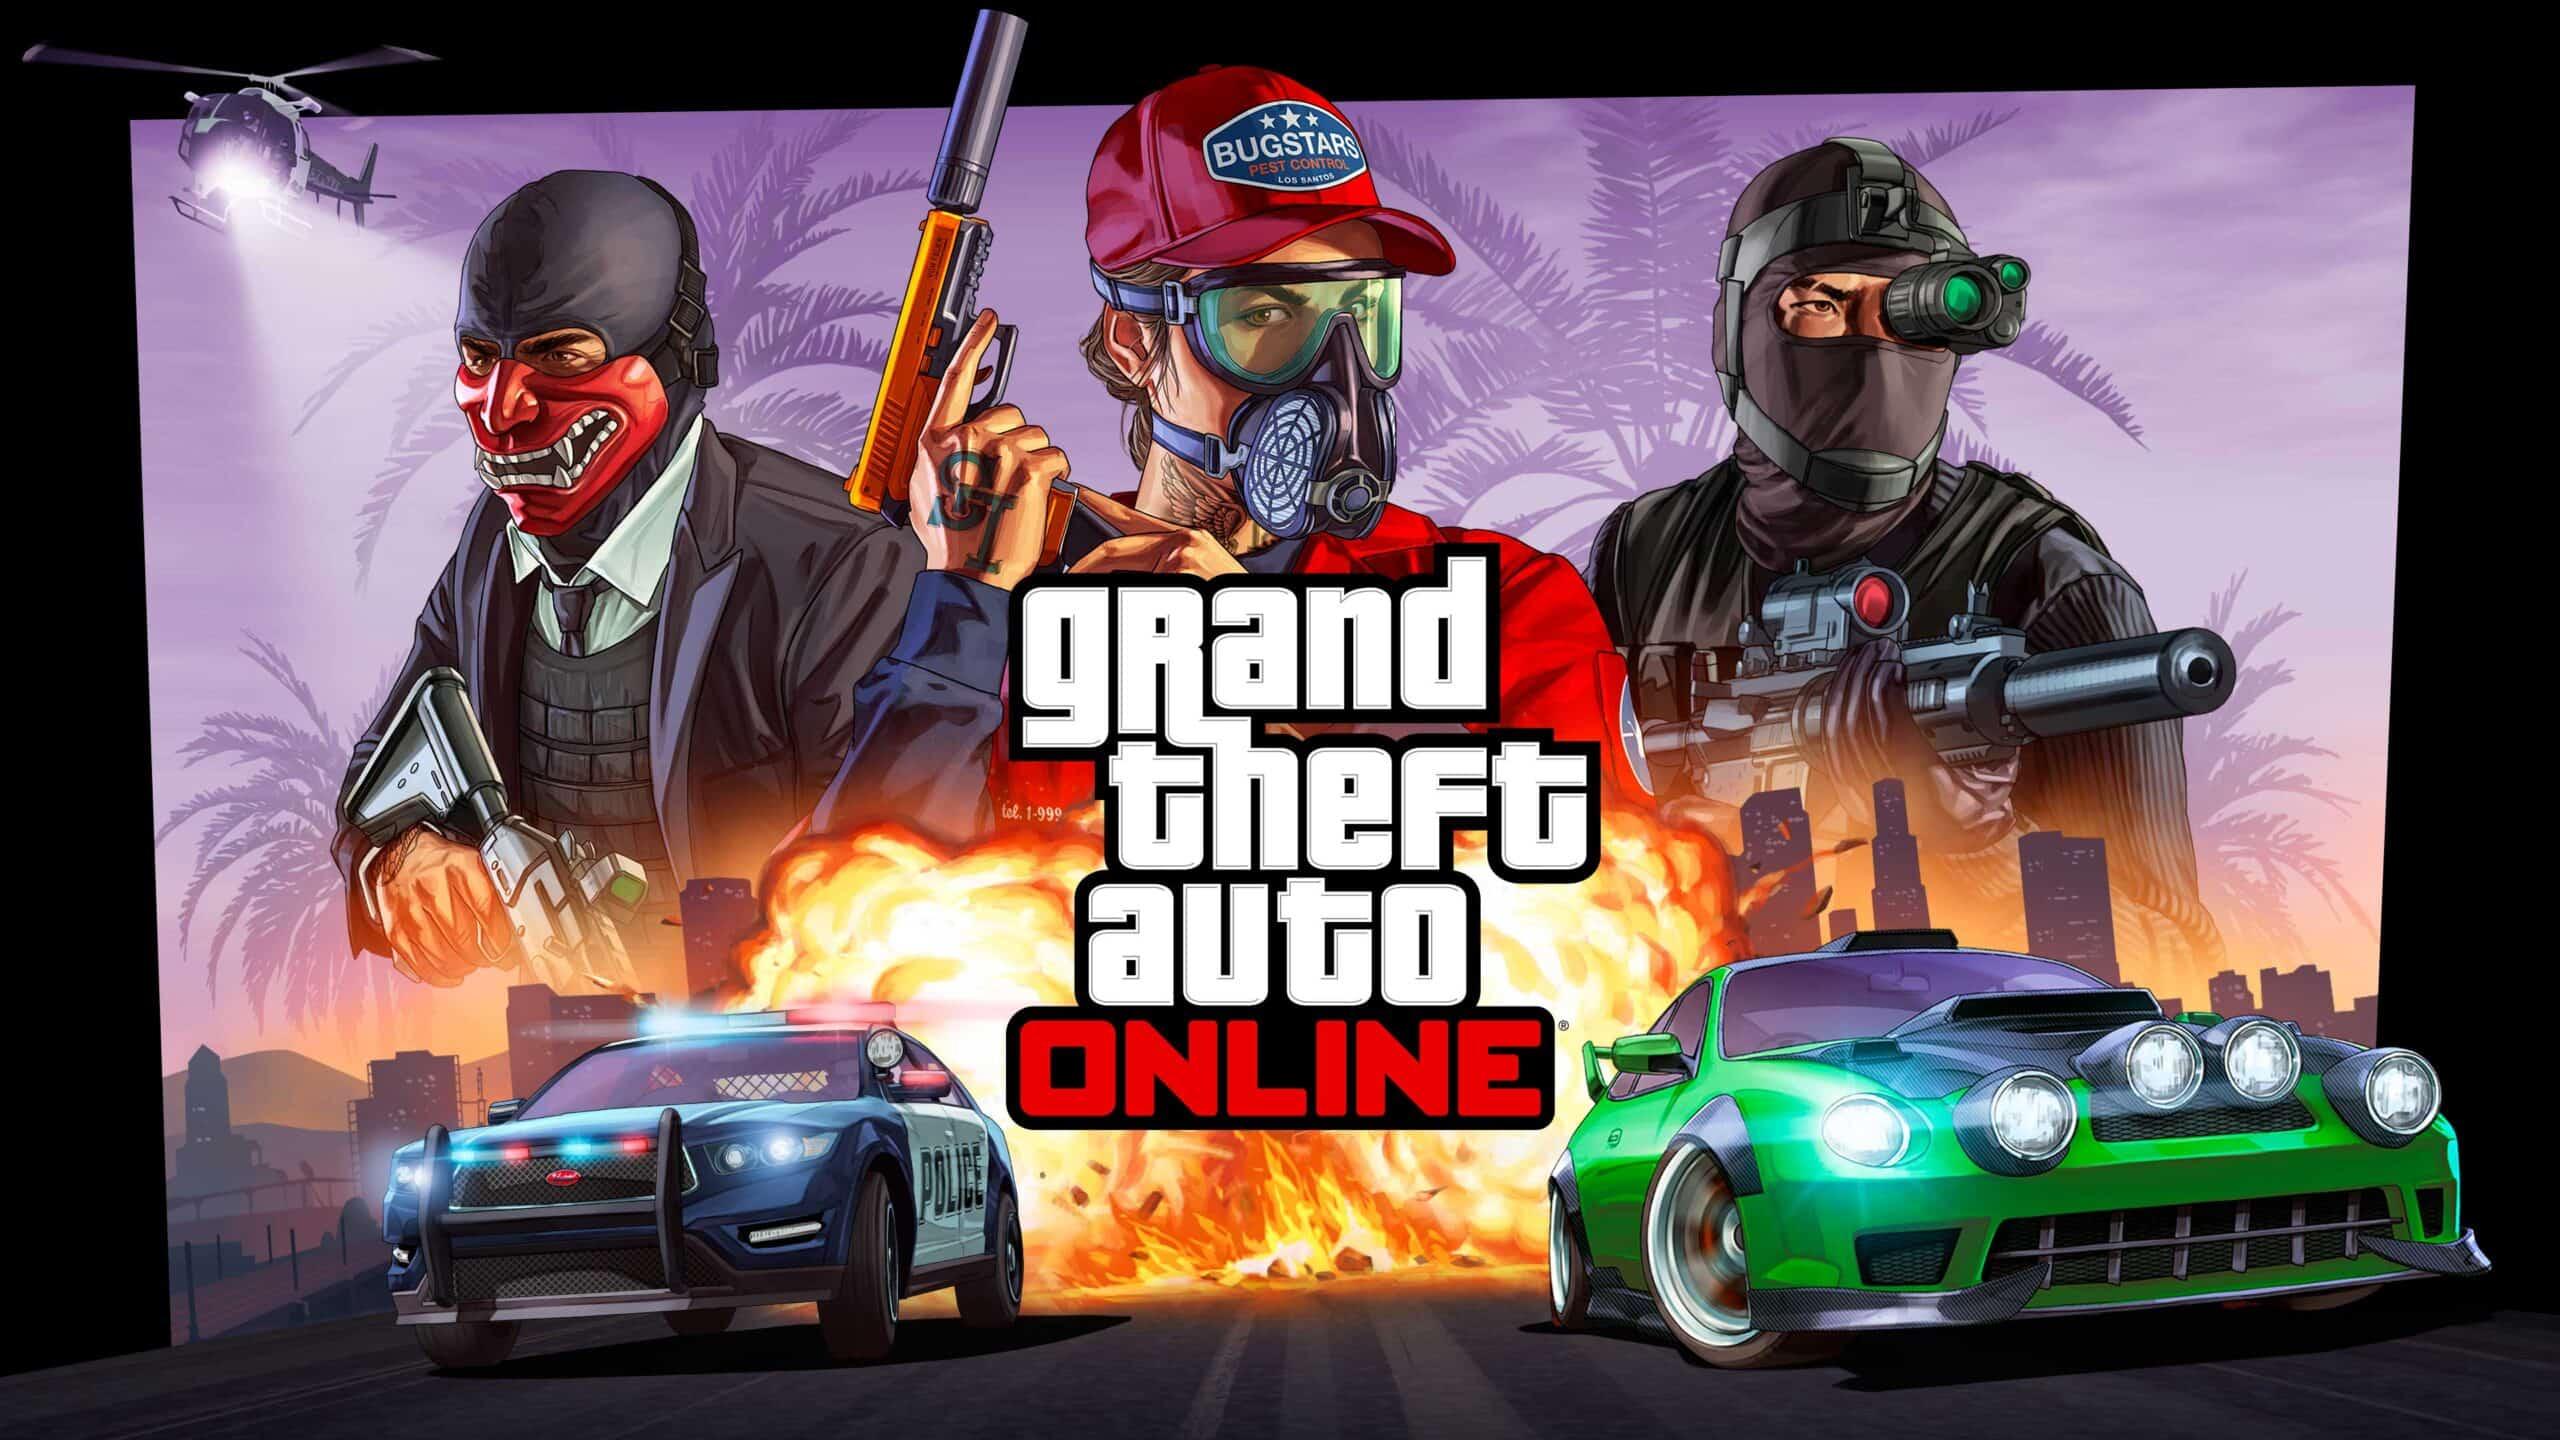 Grand Theft Auto V' puts theft back in the game